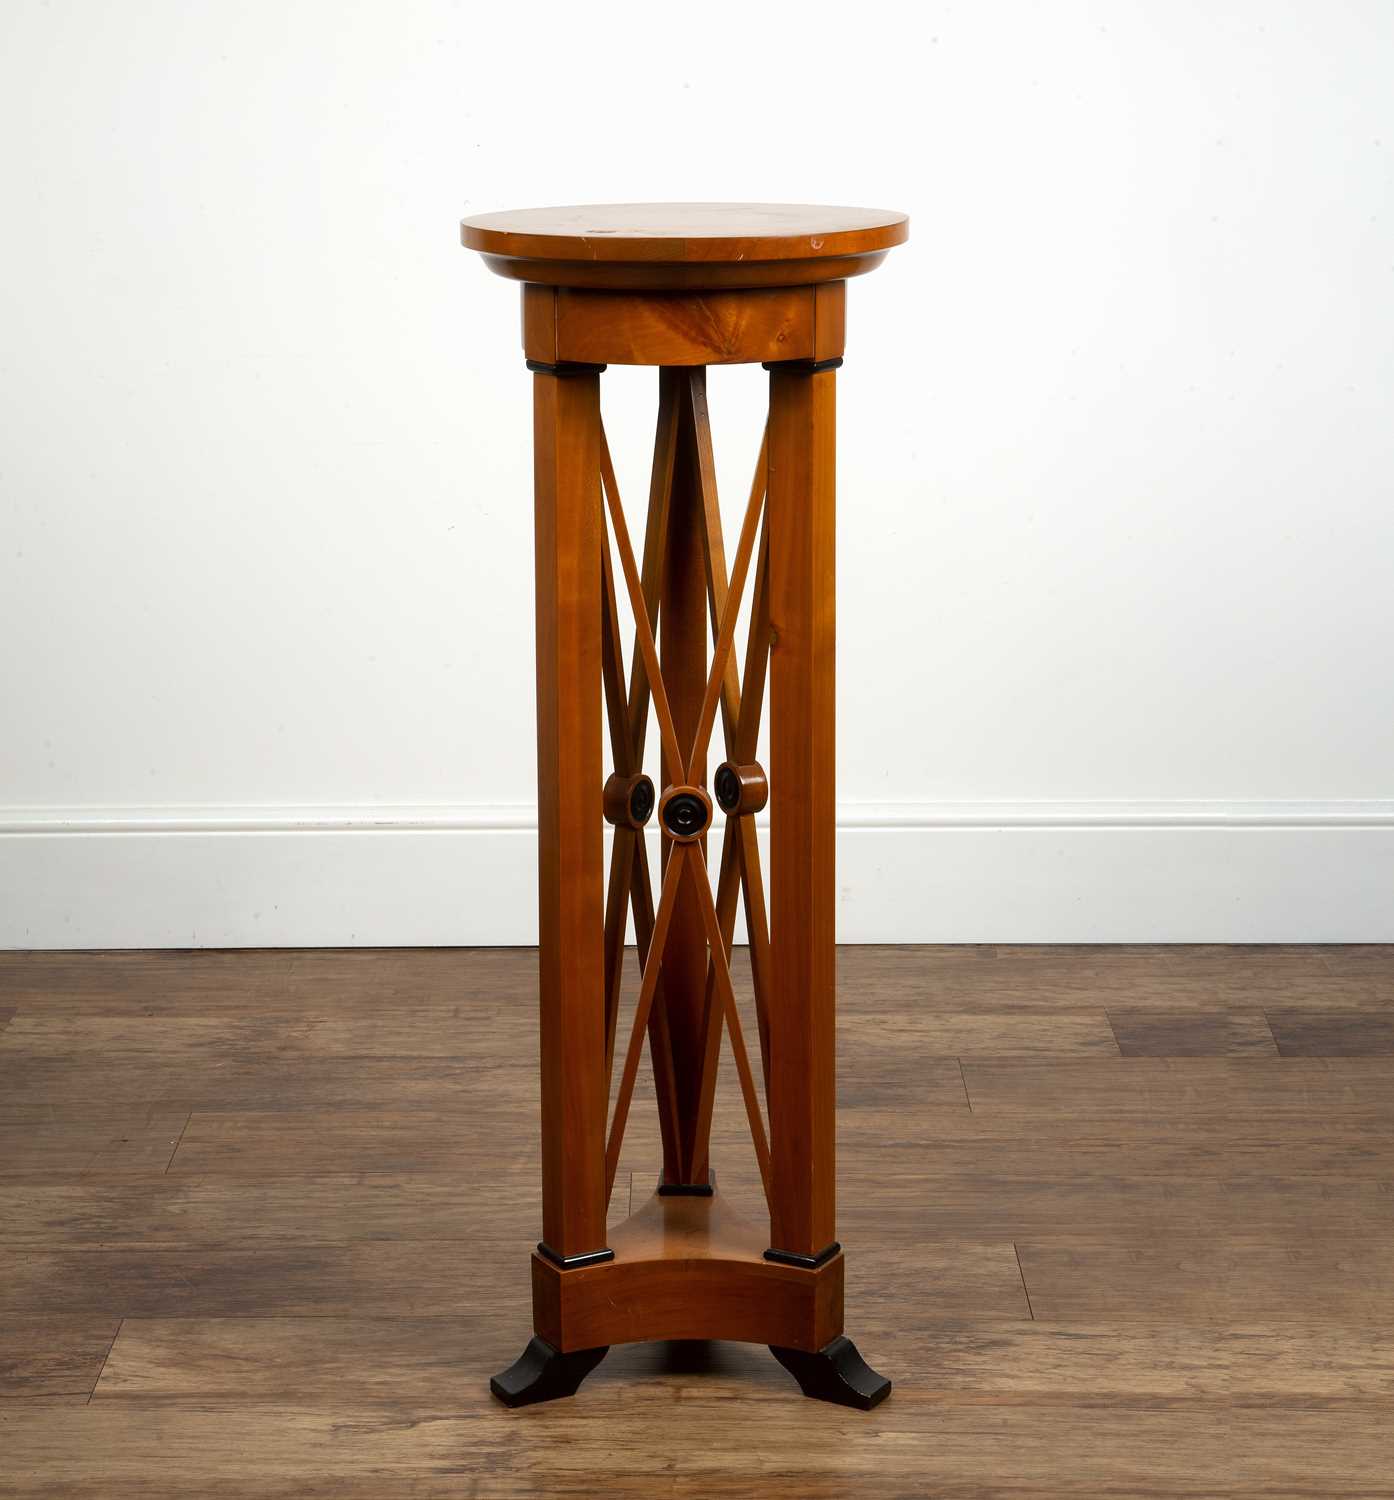 Biedermeier style jardiniere or urn stand Late 20th Century, satin wood, with ebonised detail and